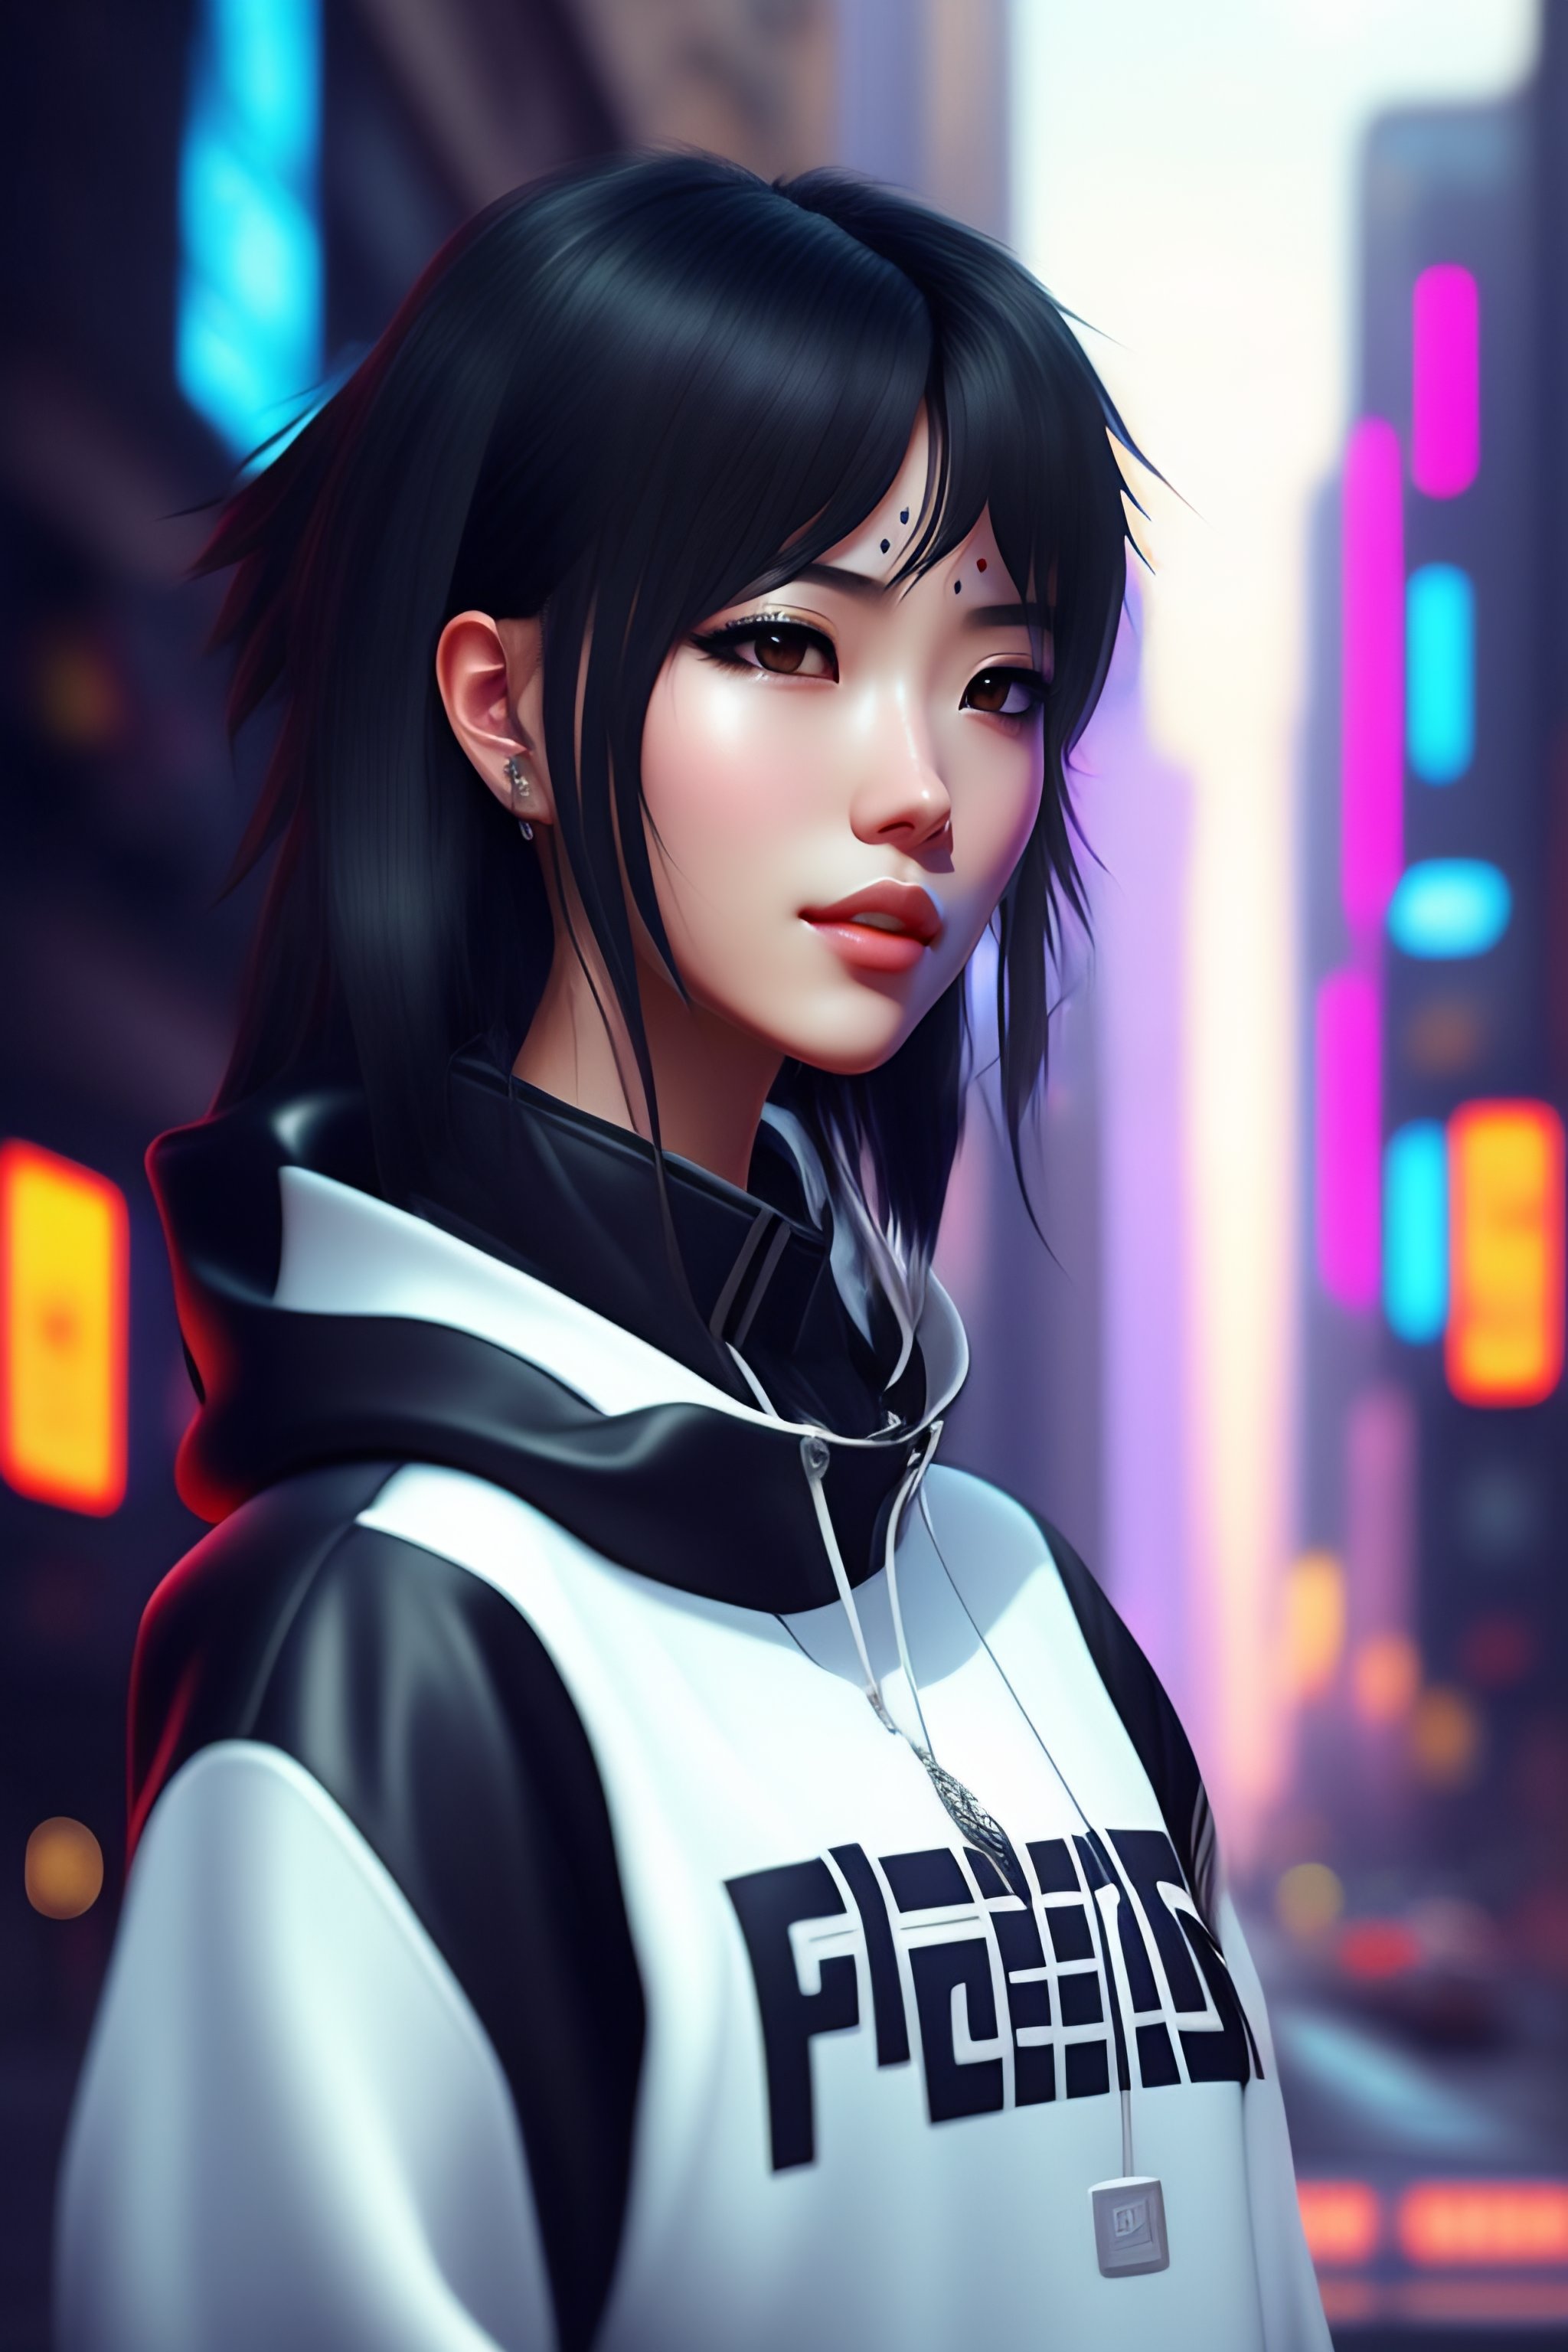 Lexica Cyberpunk City Setting There Is A Beautiful Young Anime Woman She Is Happy She Is 6597